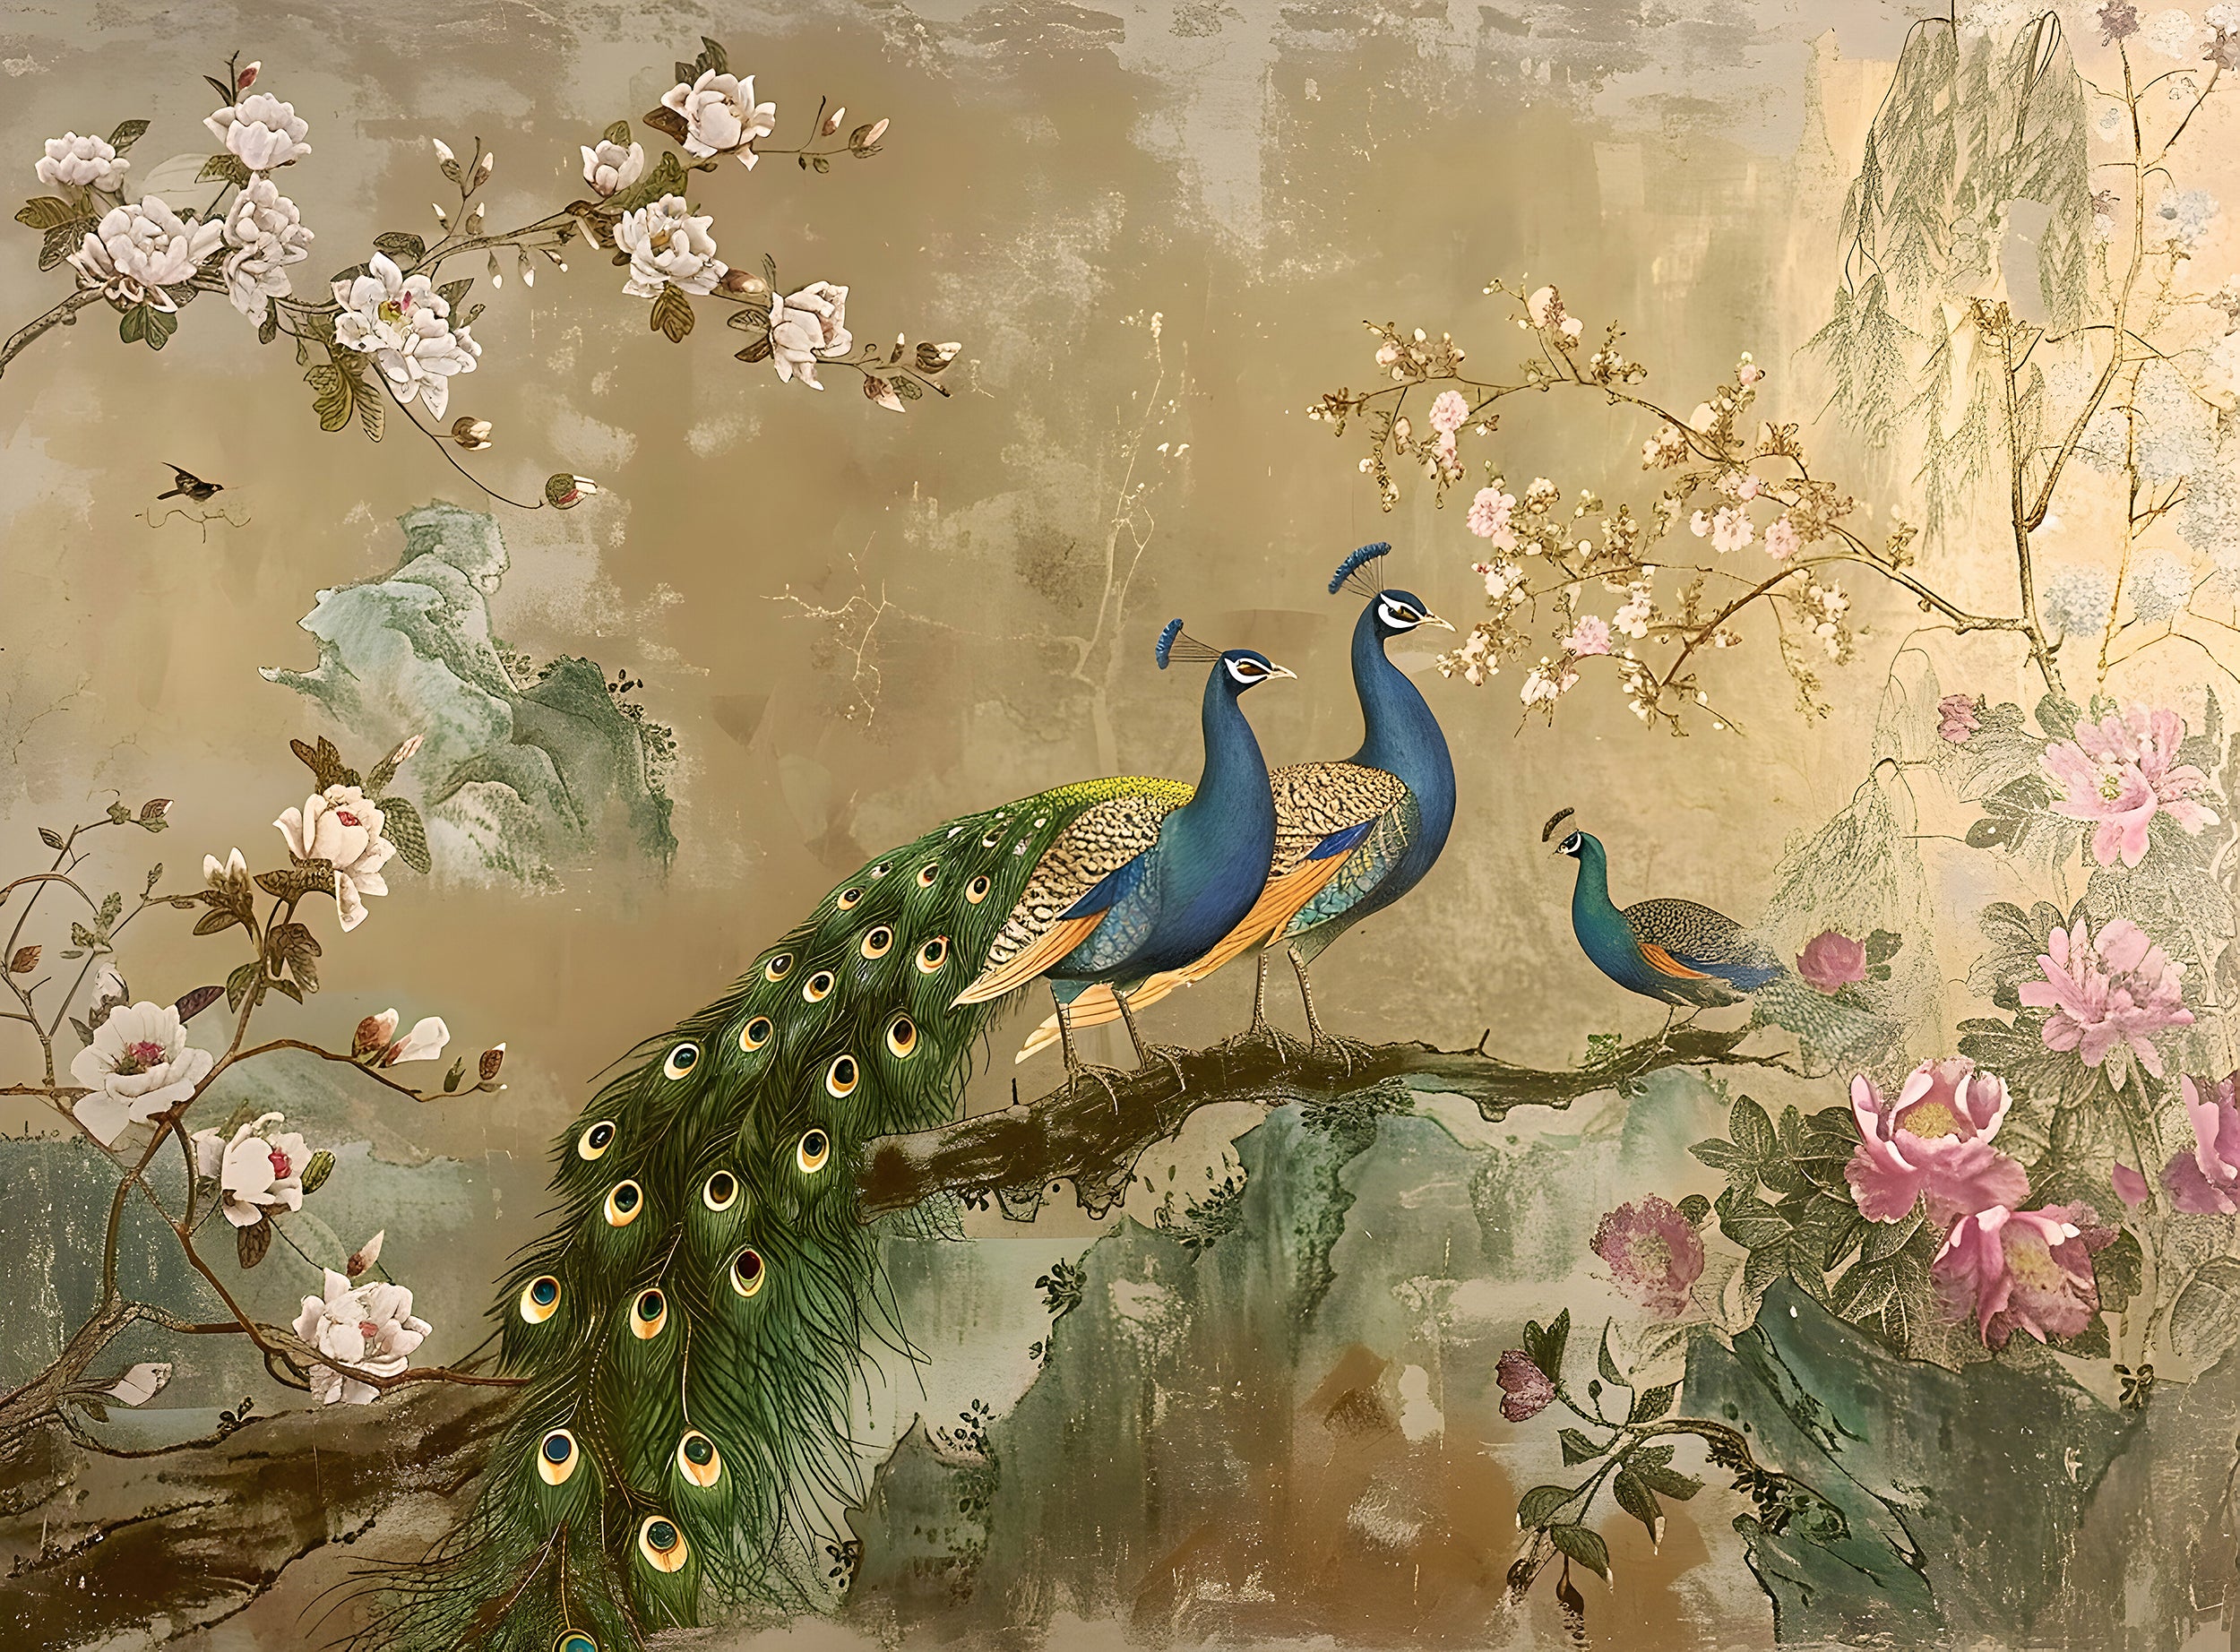 Chinoiserie Wallpaper, Colorful Peacock Wall Mural, Removable Vintage Golden Floral Wallpaper, Peel and Stick Classic Mural With Flowers and Birds